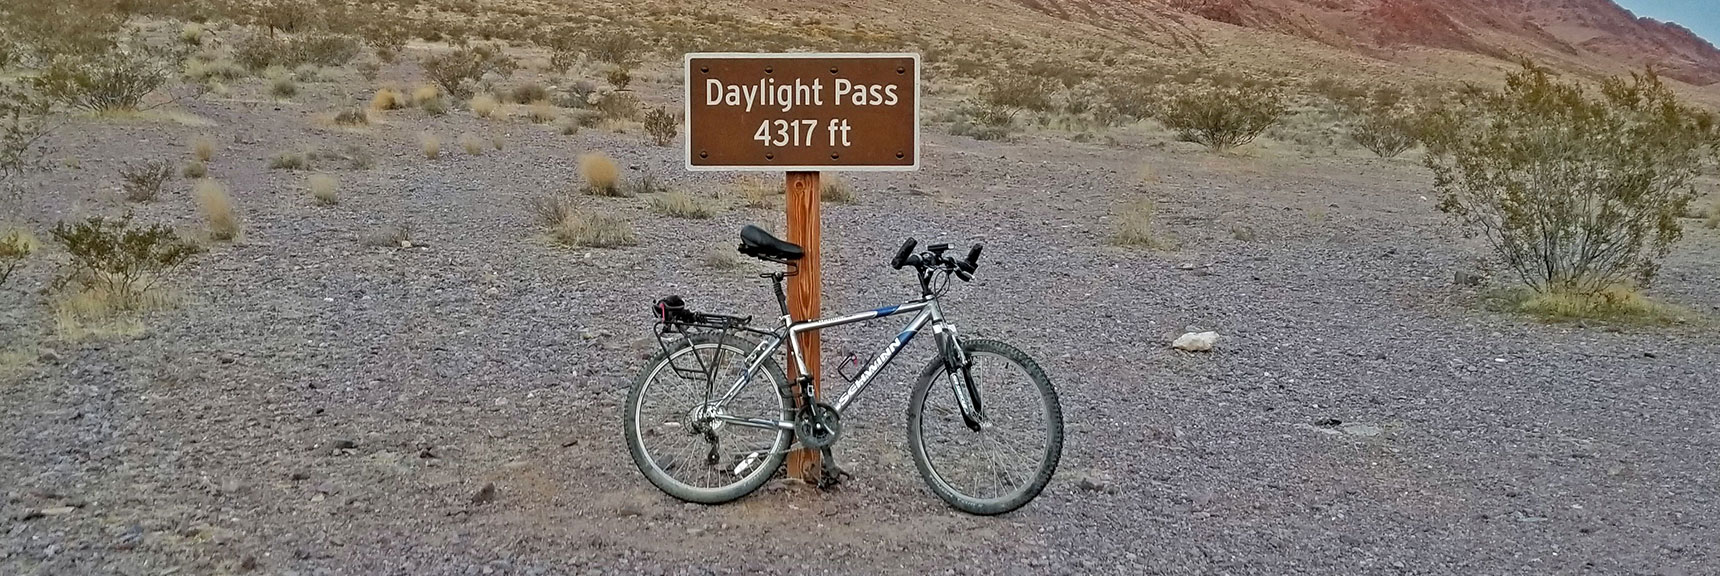 First 4000ft Ascent Achieved! Another 3000ft Ascent to Go Before Day's End. | Titus Canyon Grand Loop by Mountain Bike | Death Valley National Park, California